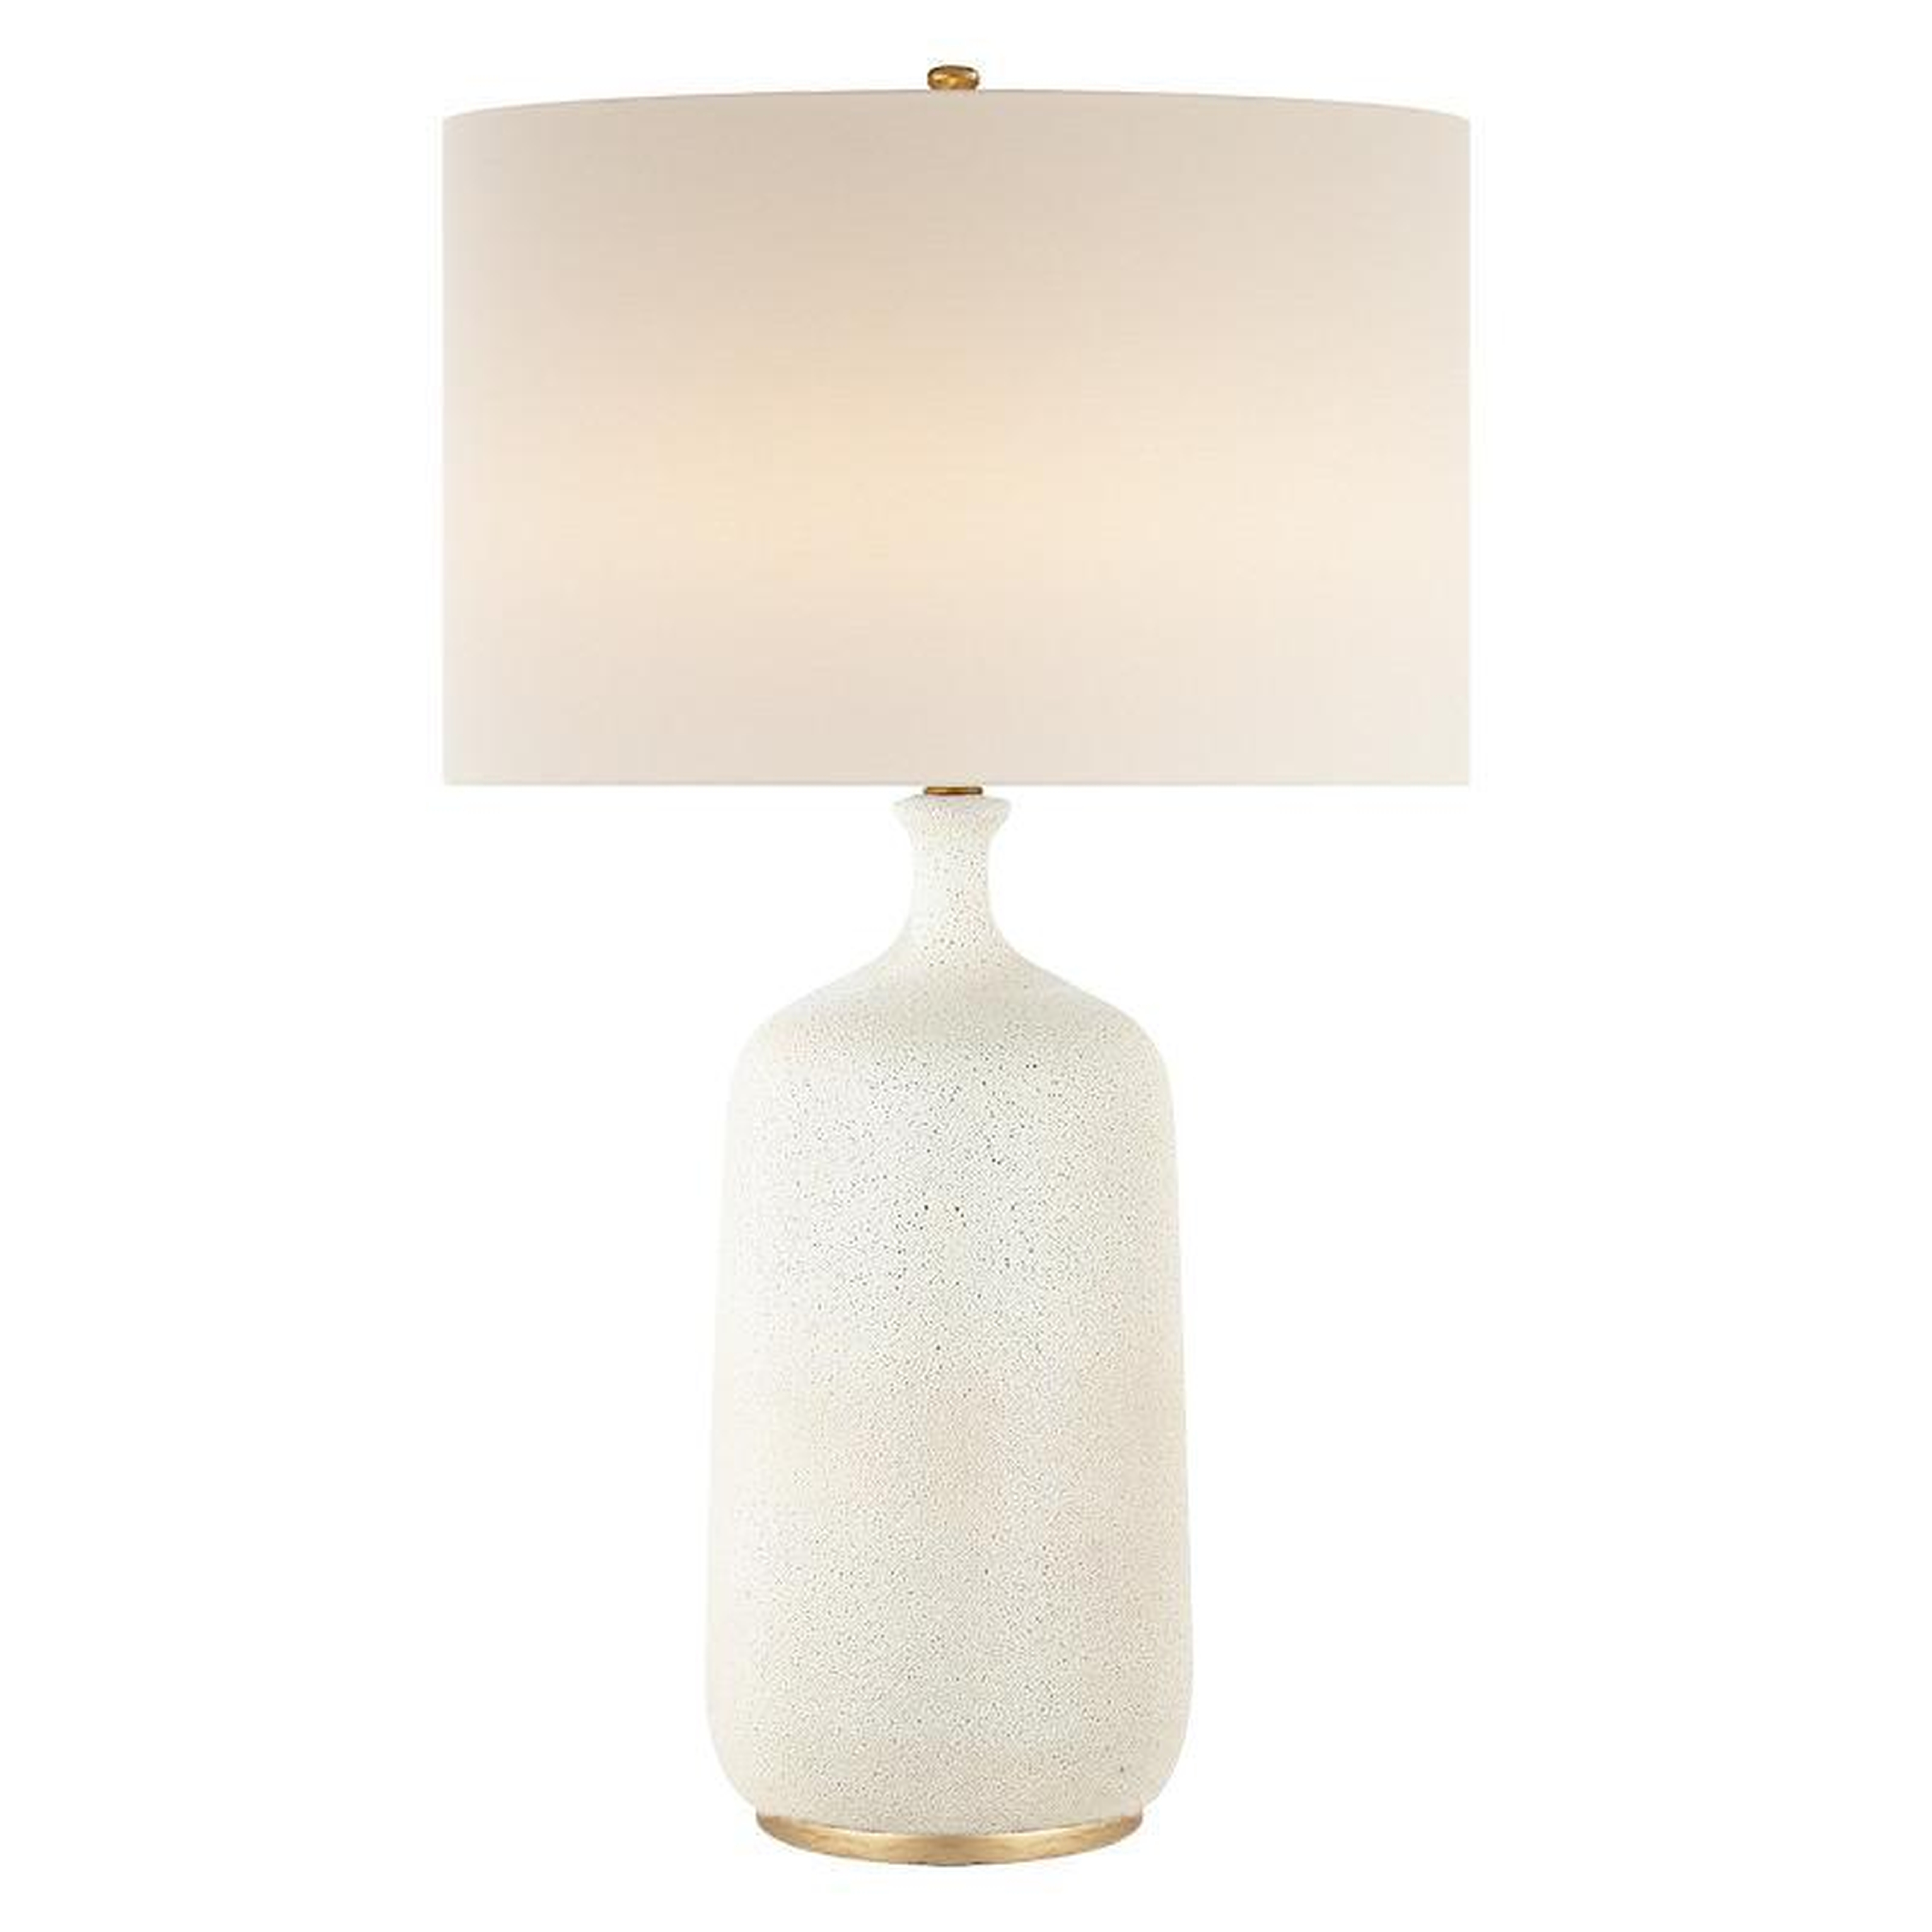 CULLODEN TABLE LAMP - VOLCANIC IVORY - McGee & Co.